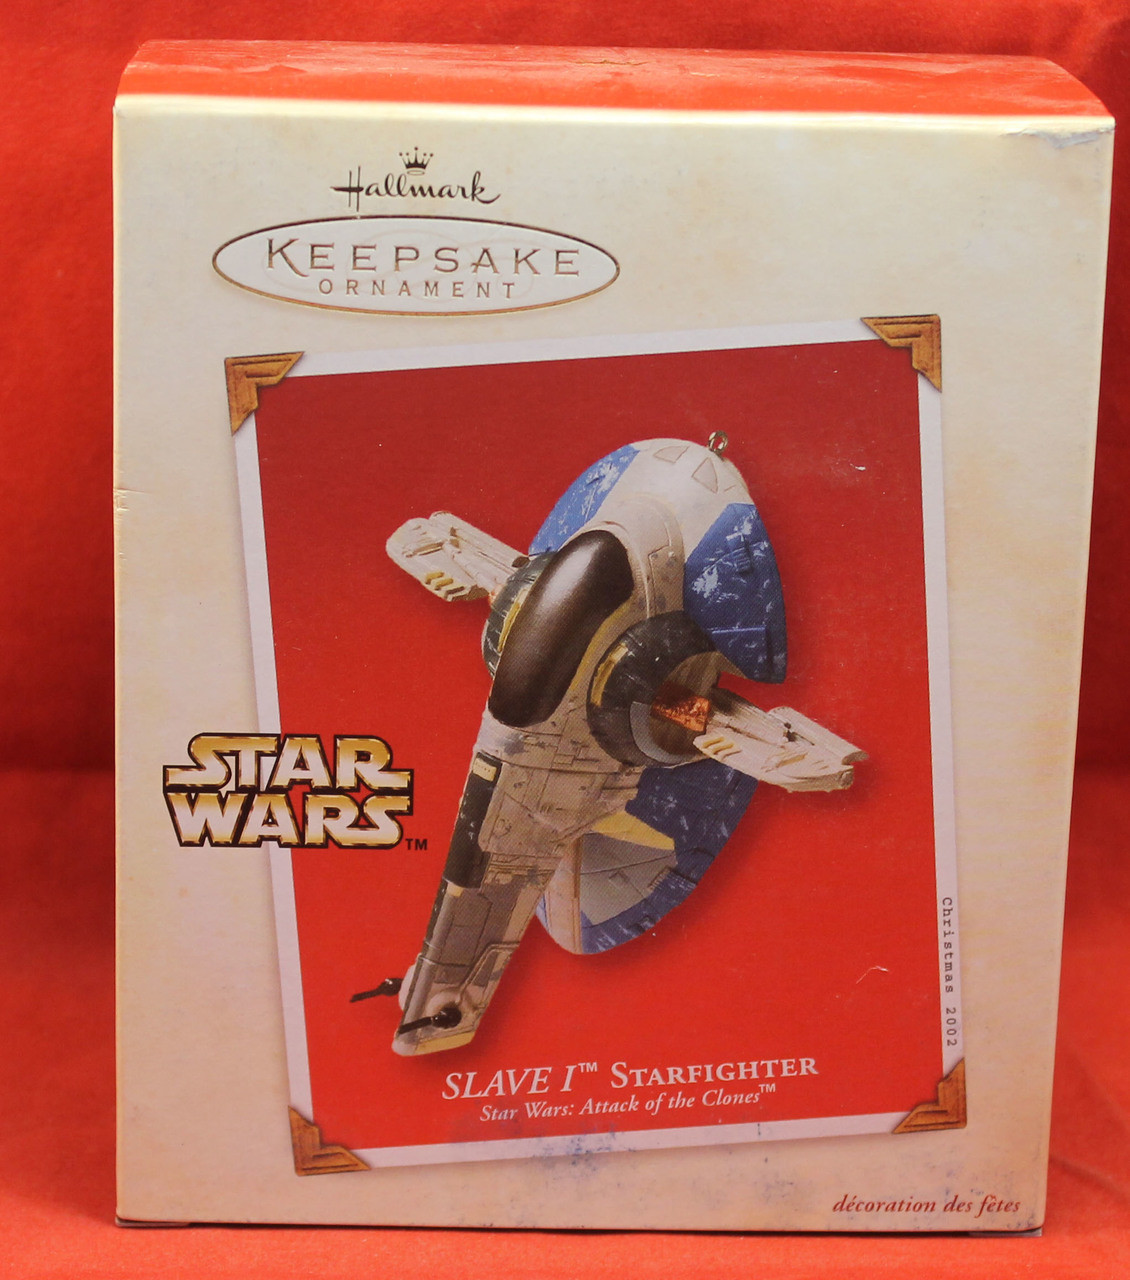 Star Wars Christmas Ornament - Slave I Attack of the Clones